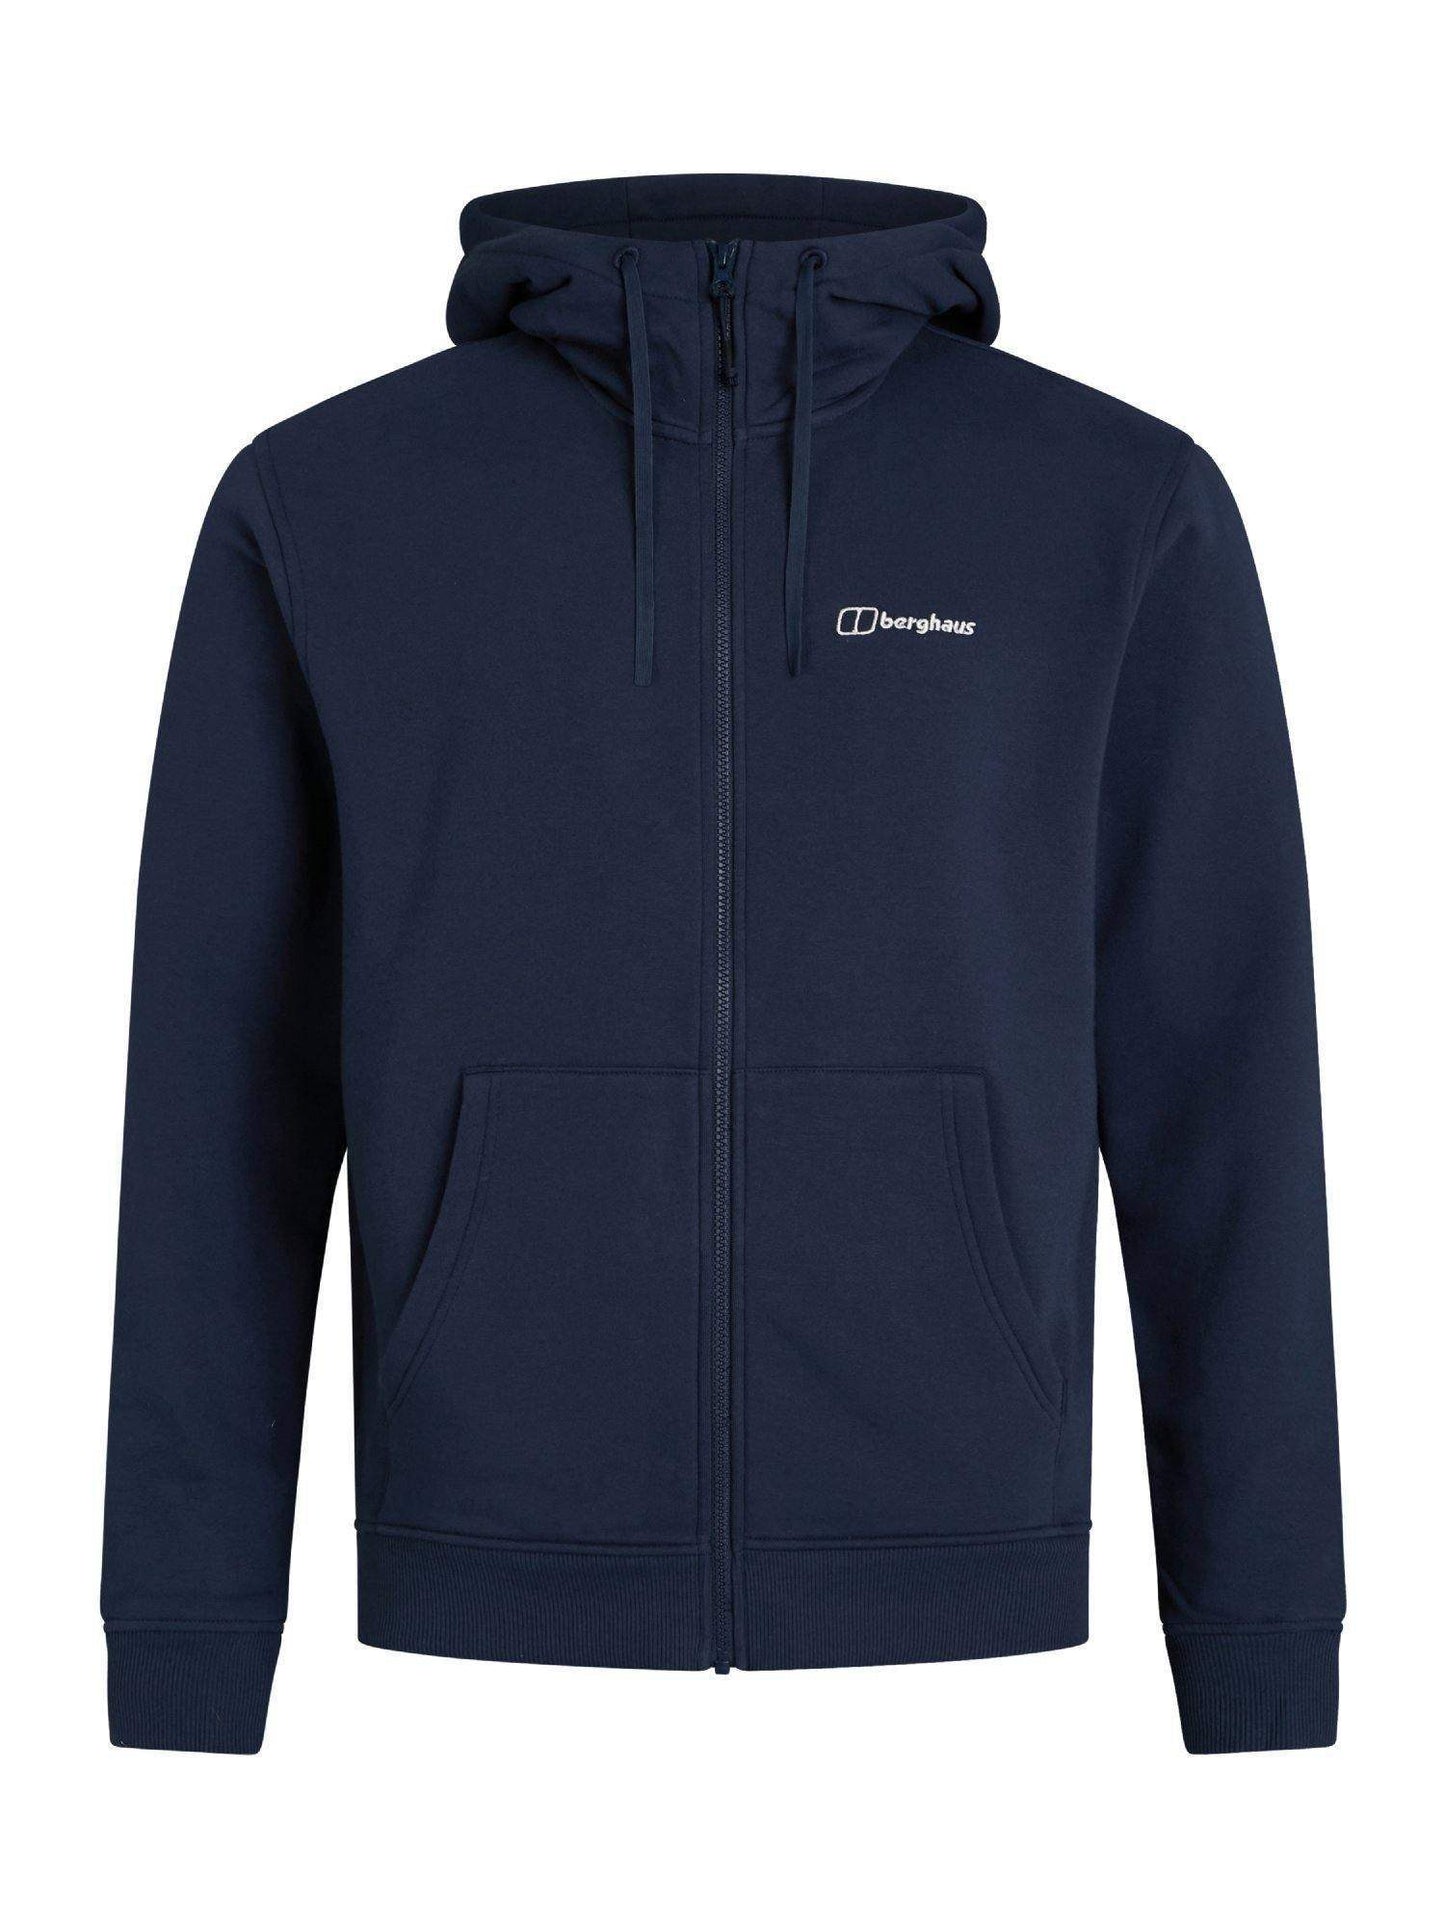 Berghaus Men's Logo FZ Hoody - The Luxury Promotional Gifts Company Limited